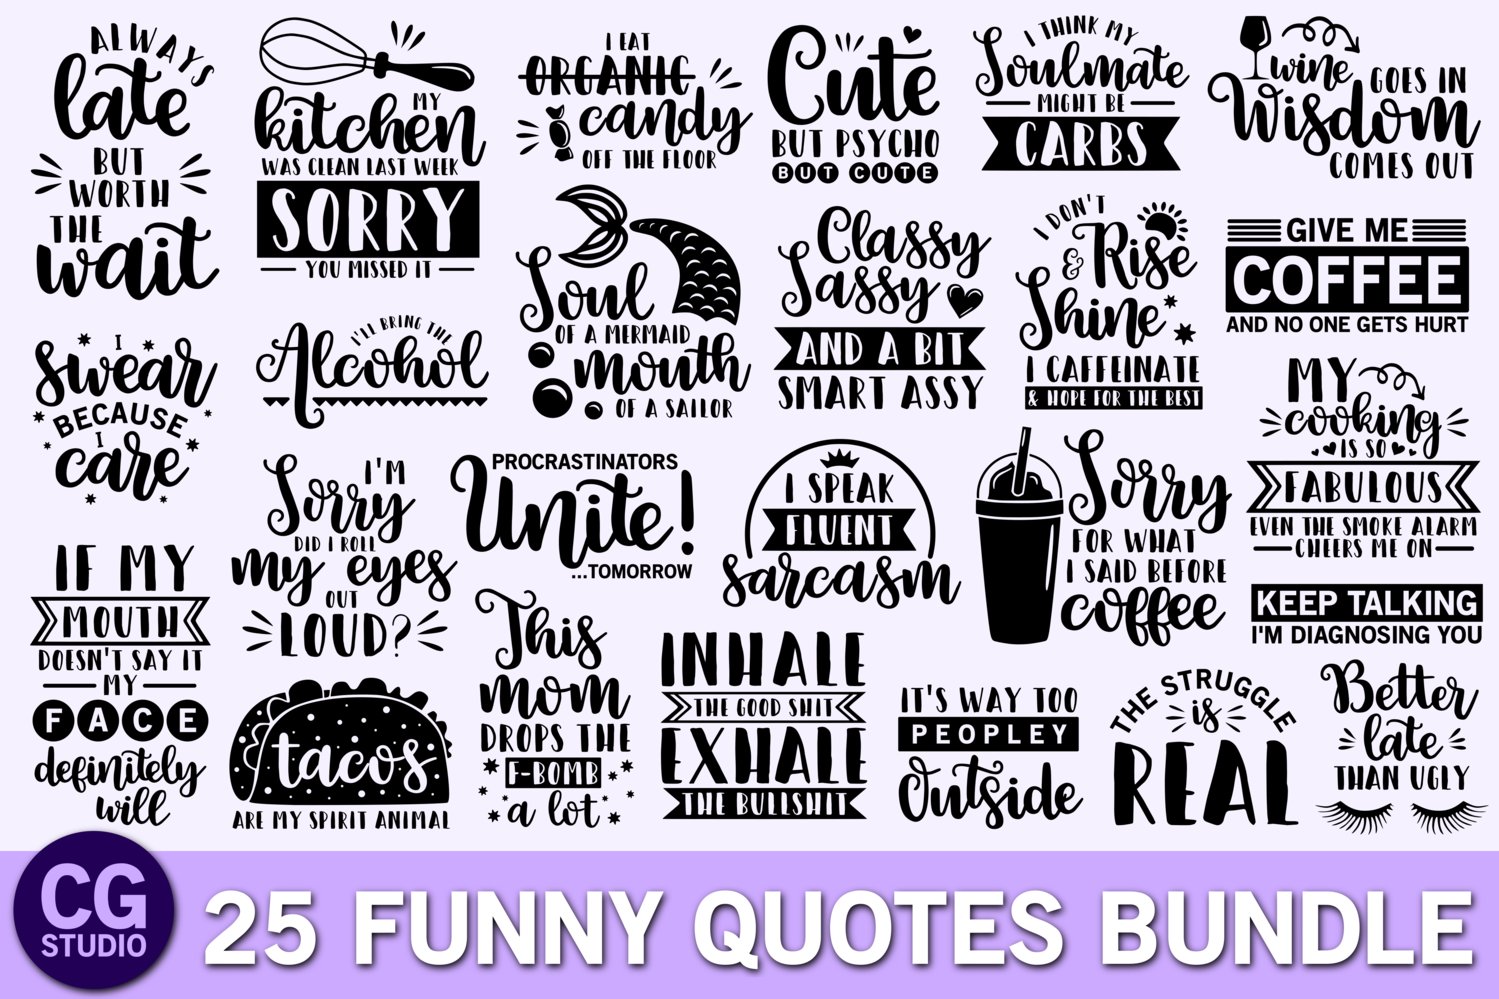 Coffee bindle with funny quotes.